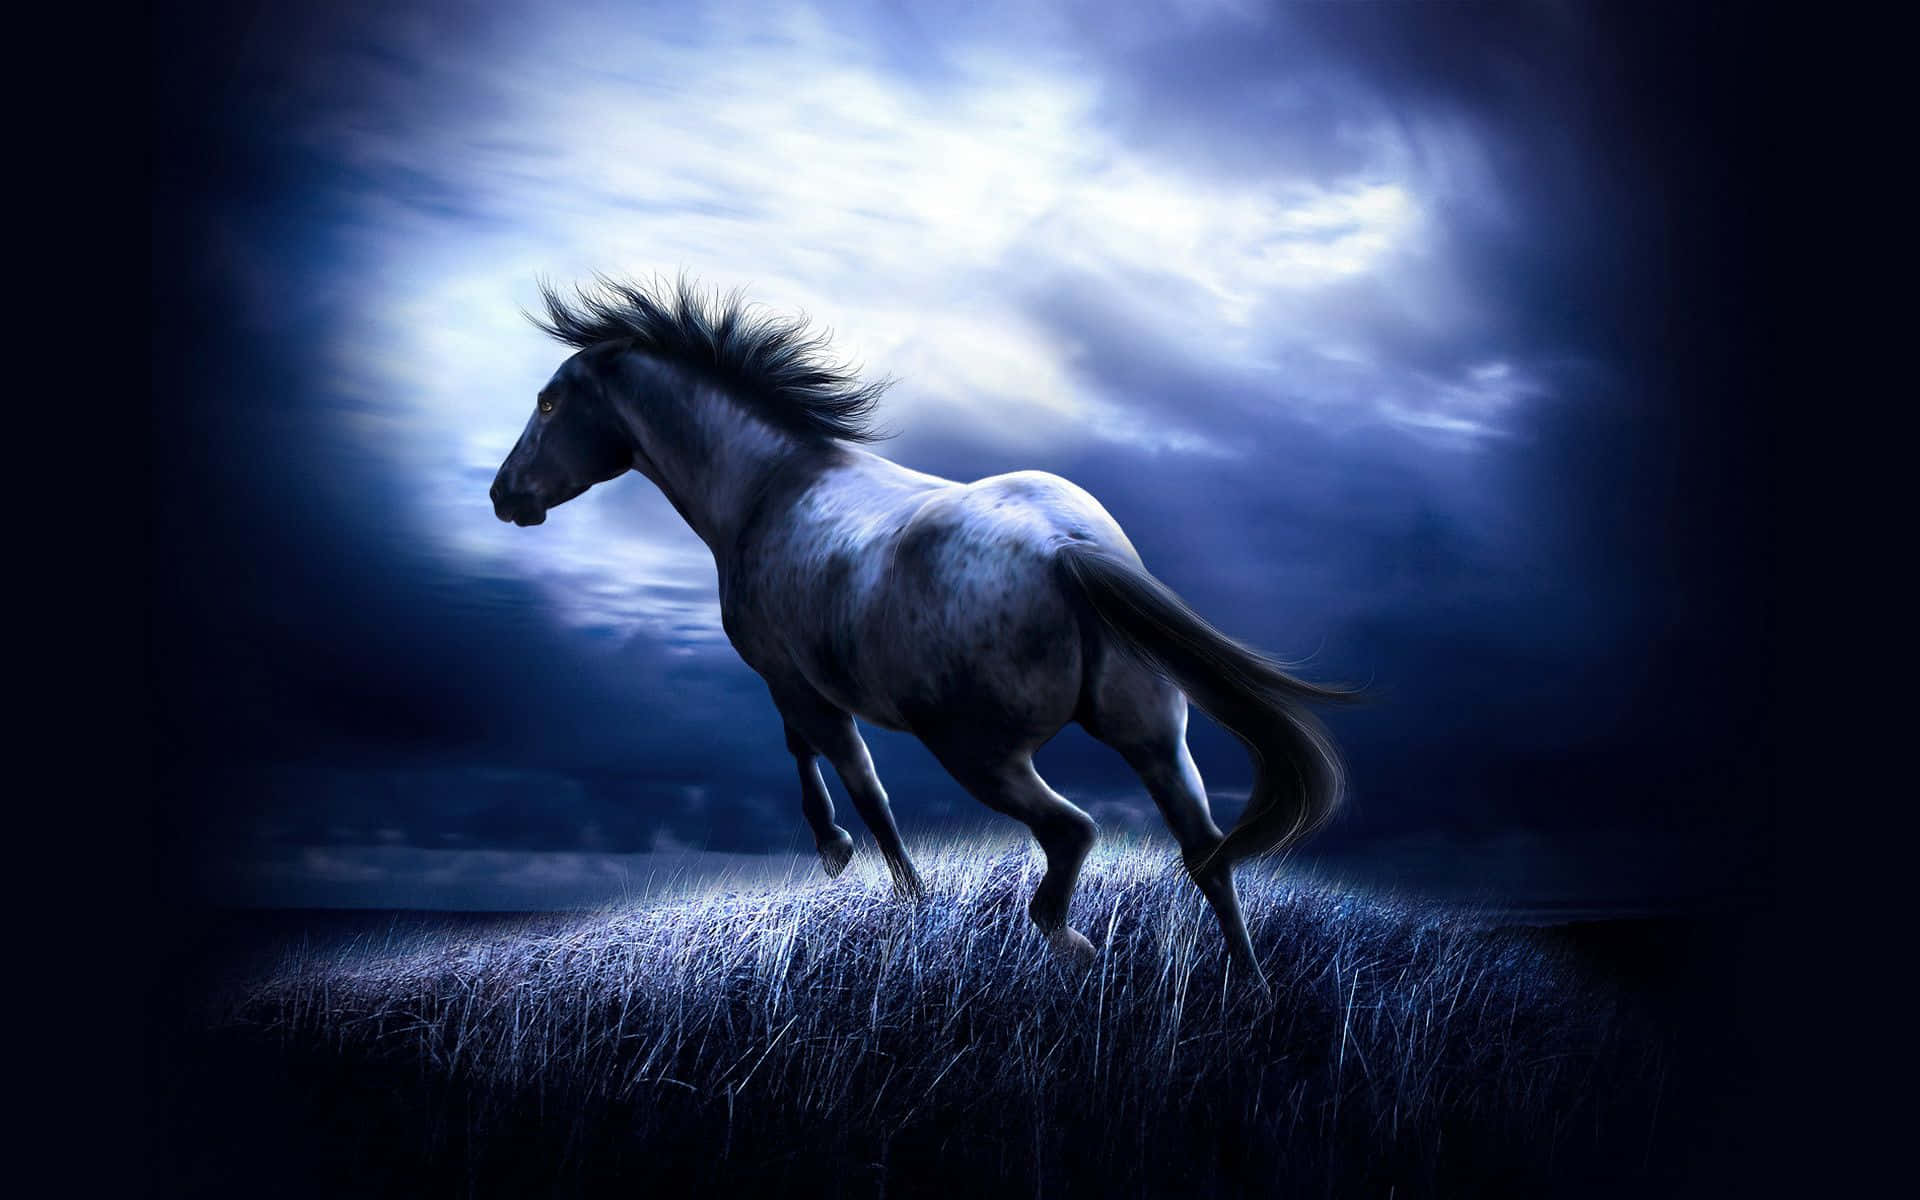 Cool Horse Glowing In The Moonlight Wallpaper